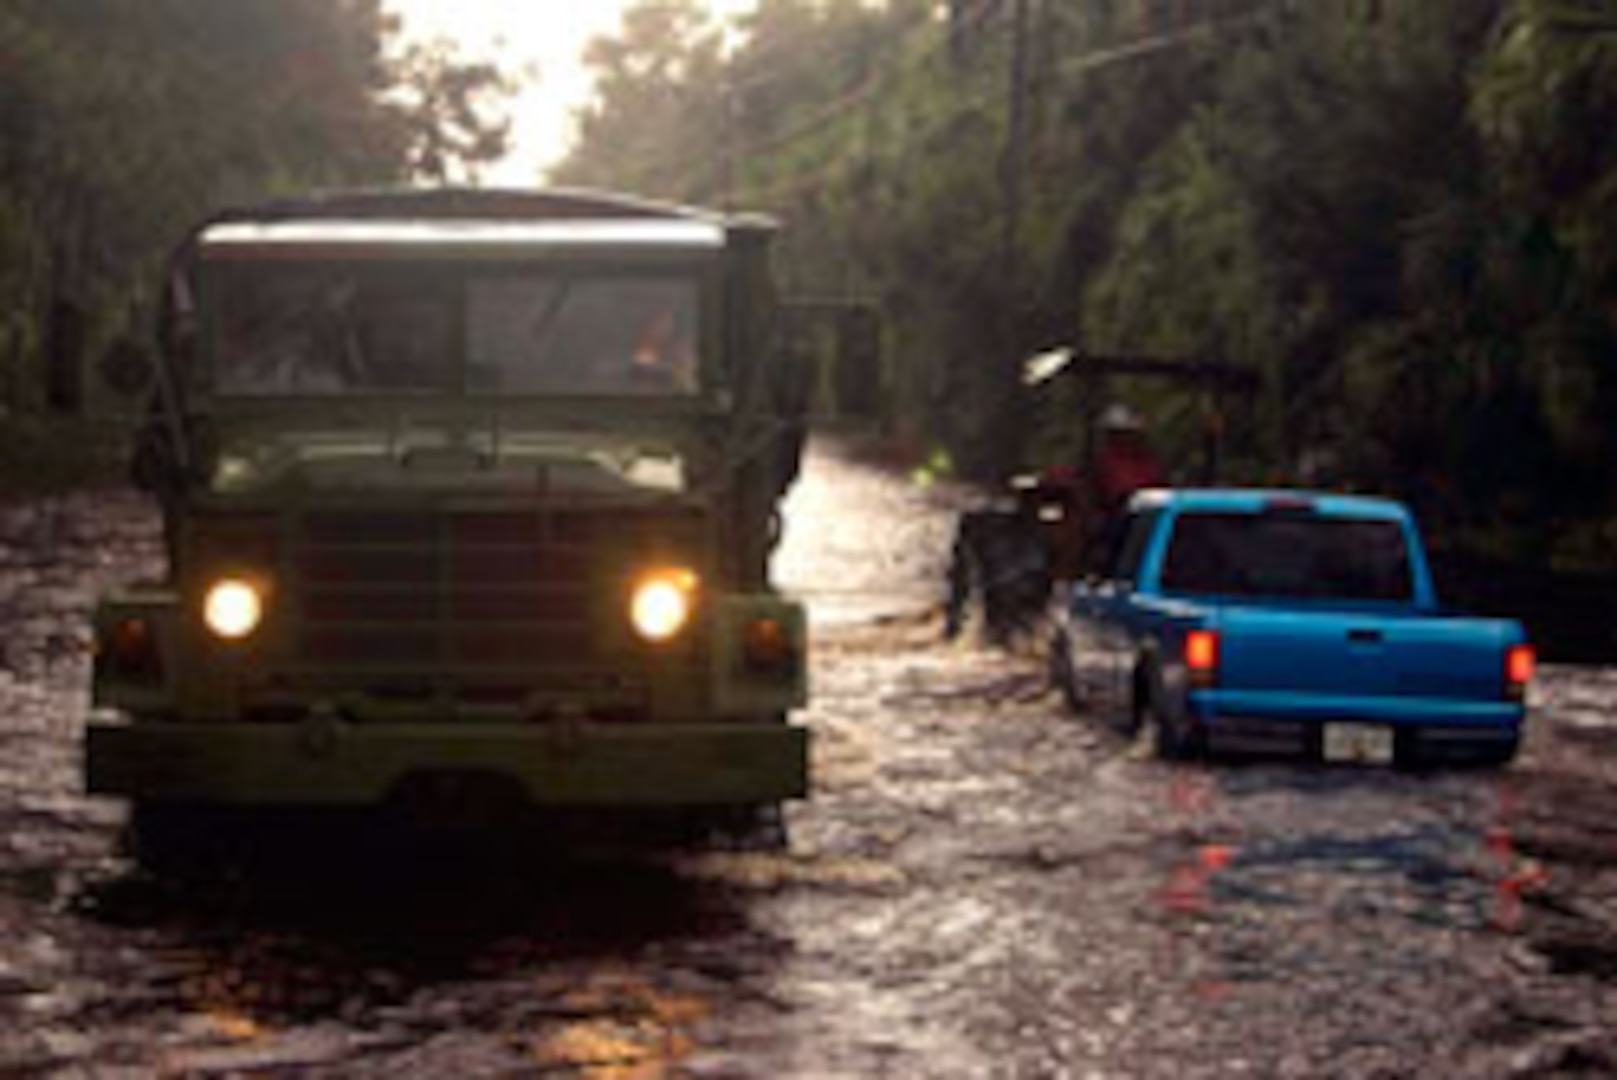 Members of the 2nd Battalion, 124th Infantry Regiment driving a high-water vehicle search flooded roads and properties for people needing assistance or evacuation. The Florida National Guard assisted civilian agencies with nearly 500 Soldiers and Airmen supporting logistical operations and high-water vehicle rescues across central and northern Florida after recent storms.